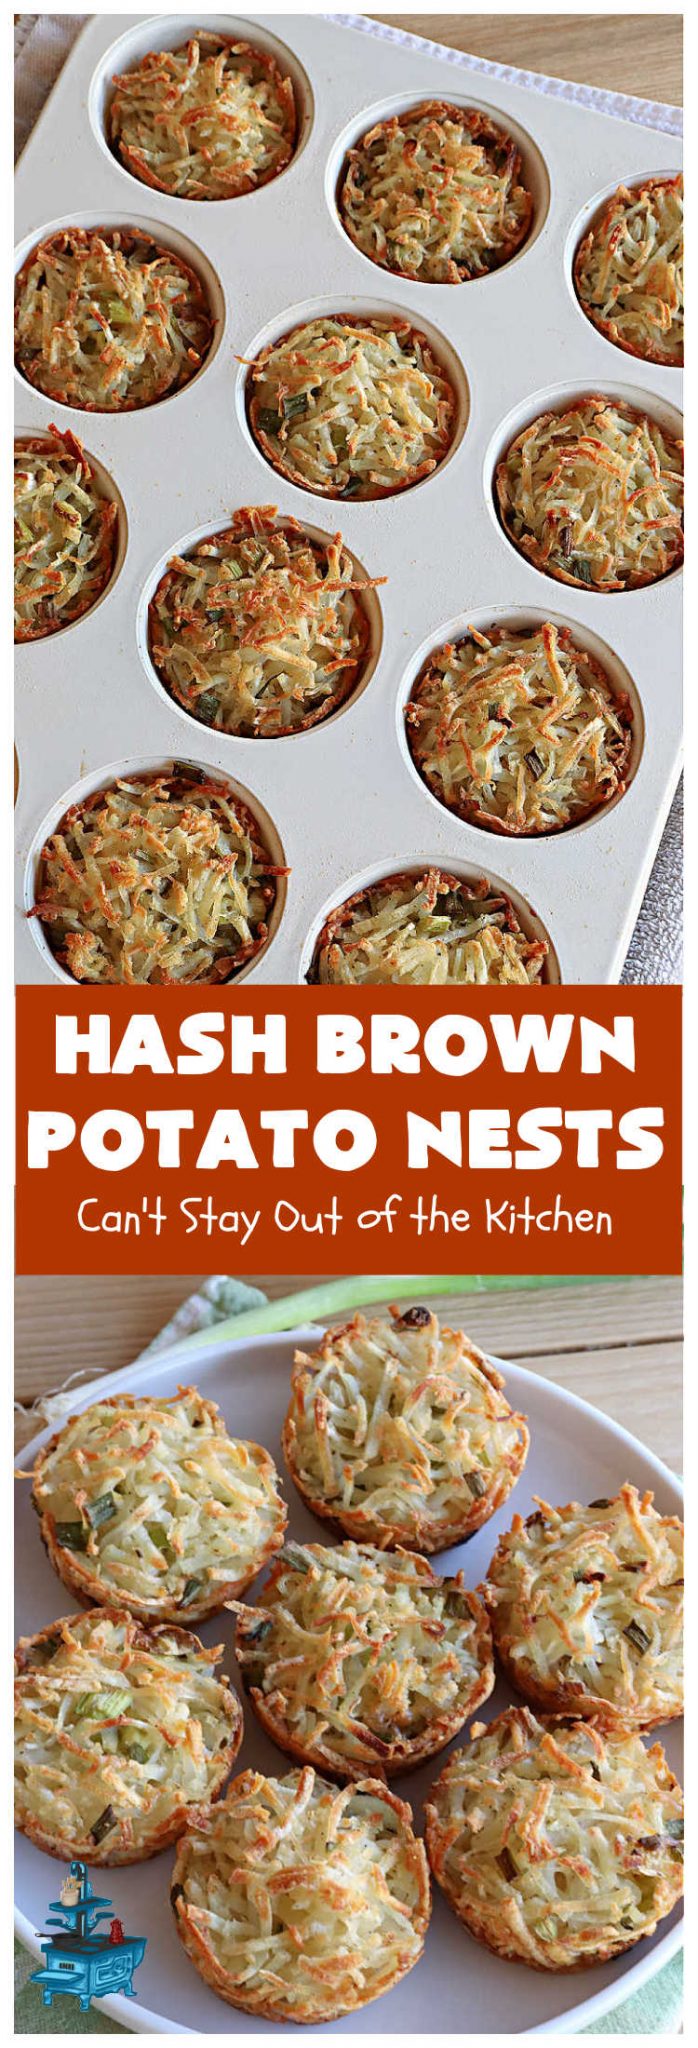 Hash Brown Potato Nests – Can't Stay Out of the Kitchen